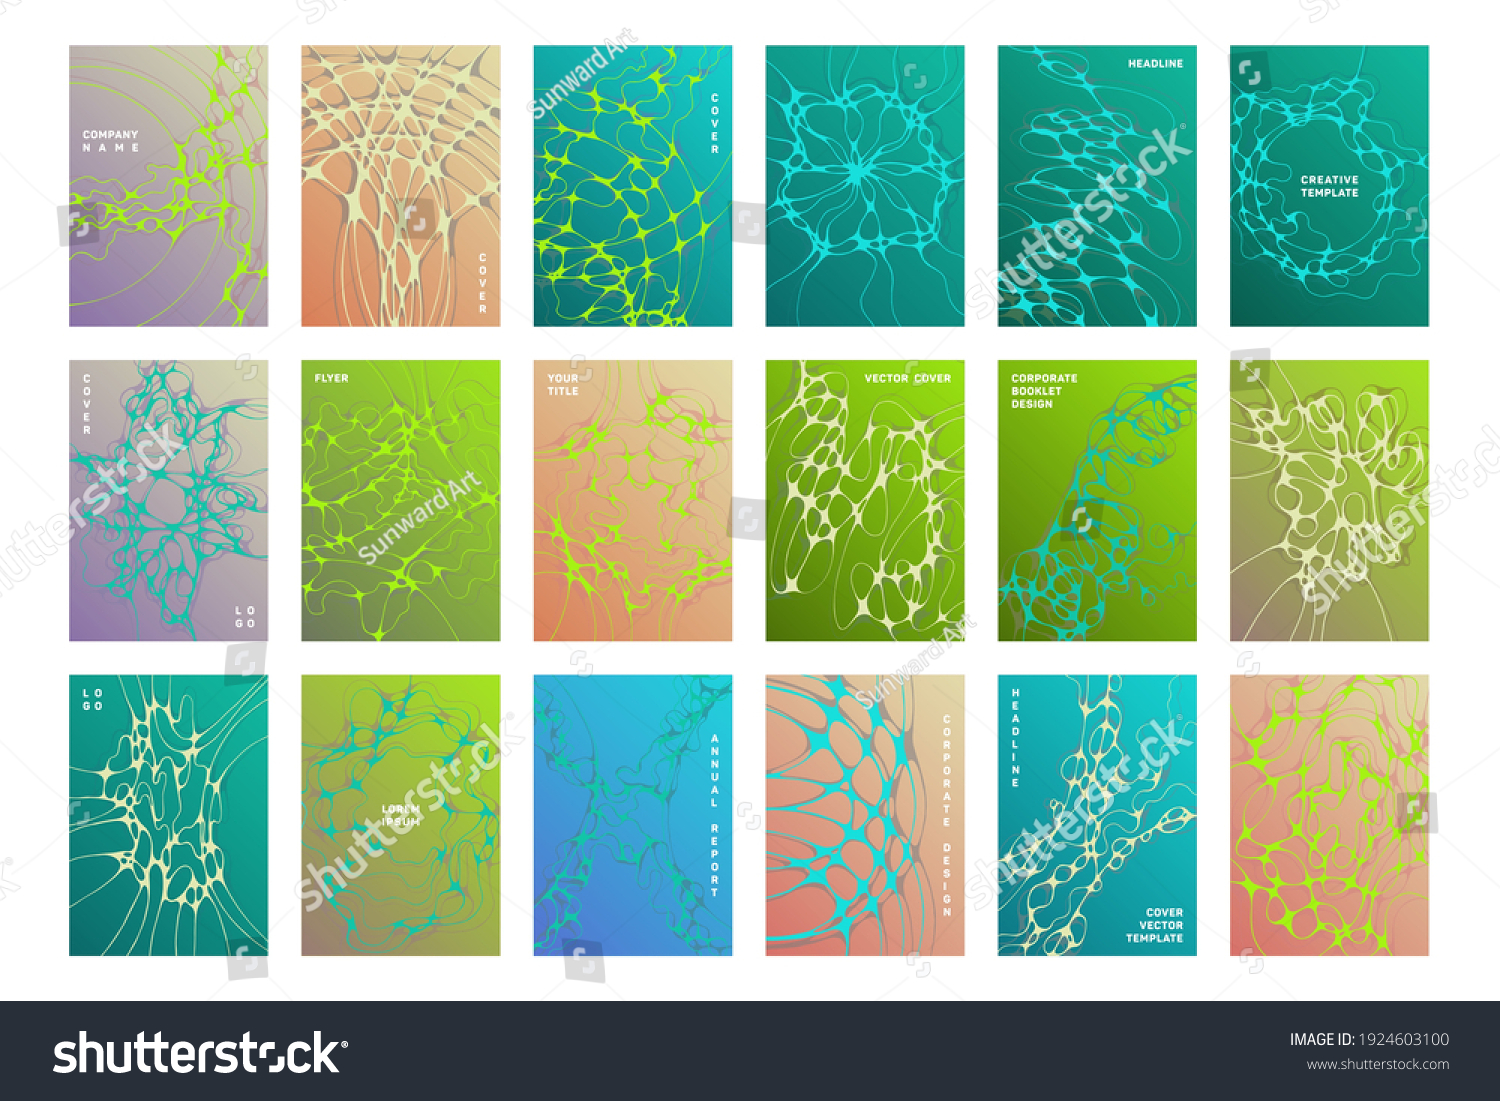 chemistry-brochure-cover-templates-vector-set-royalty-free-stock